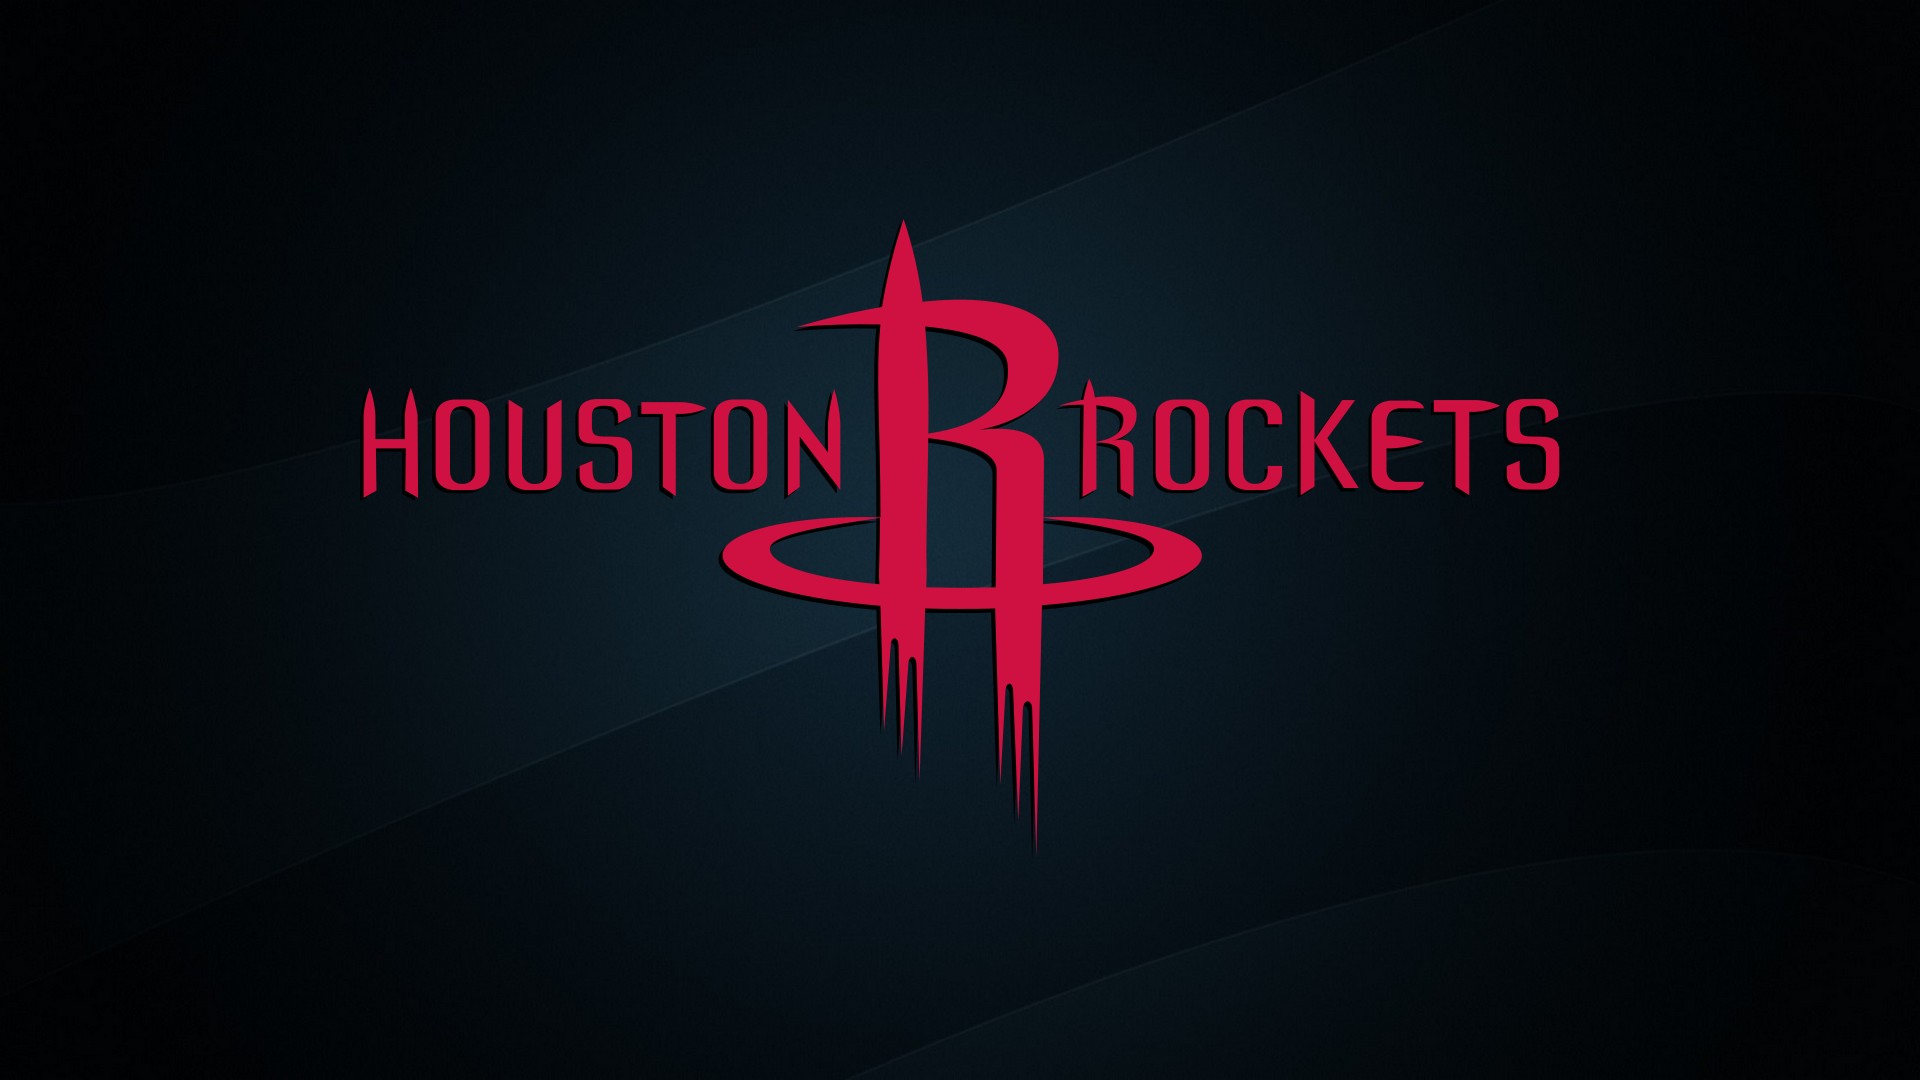 Houston Rockets For Desktop Wallpaper with image dimensions 1920x1080 pixel. You can make this wallpaper for your Desktop Computer Backgrounds, Windows or Mac Screensavers, iPhone Lock screen, Tablet or Android and another Mobile Phone device